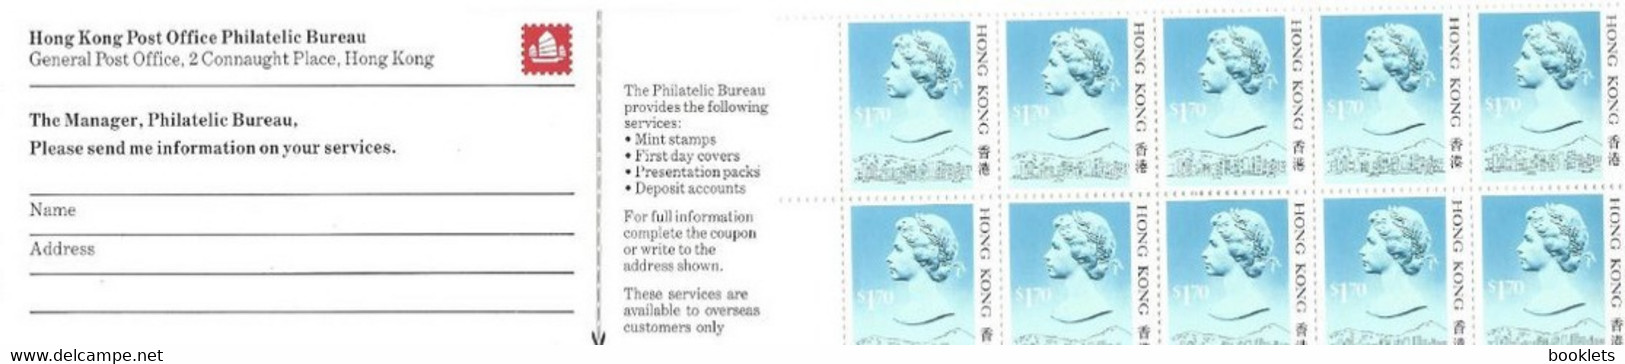 HONGKONG, Booklet 18a 1, 1987, 10x$1.70 Elizabeth Blue, Margin About 3 Cm From The Fold - Booklets